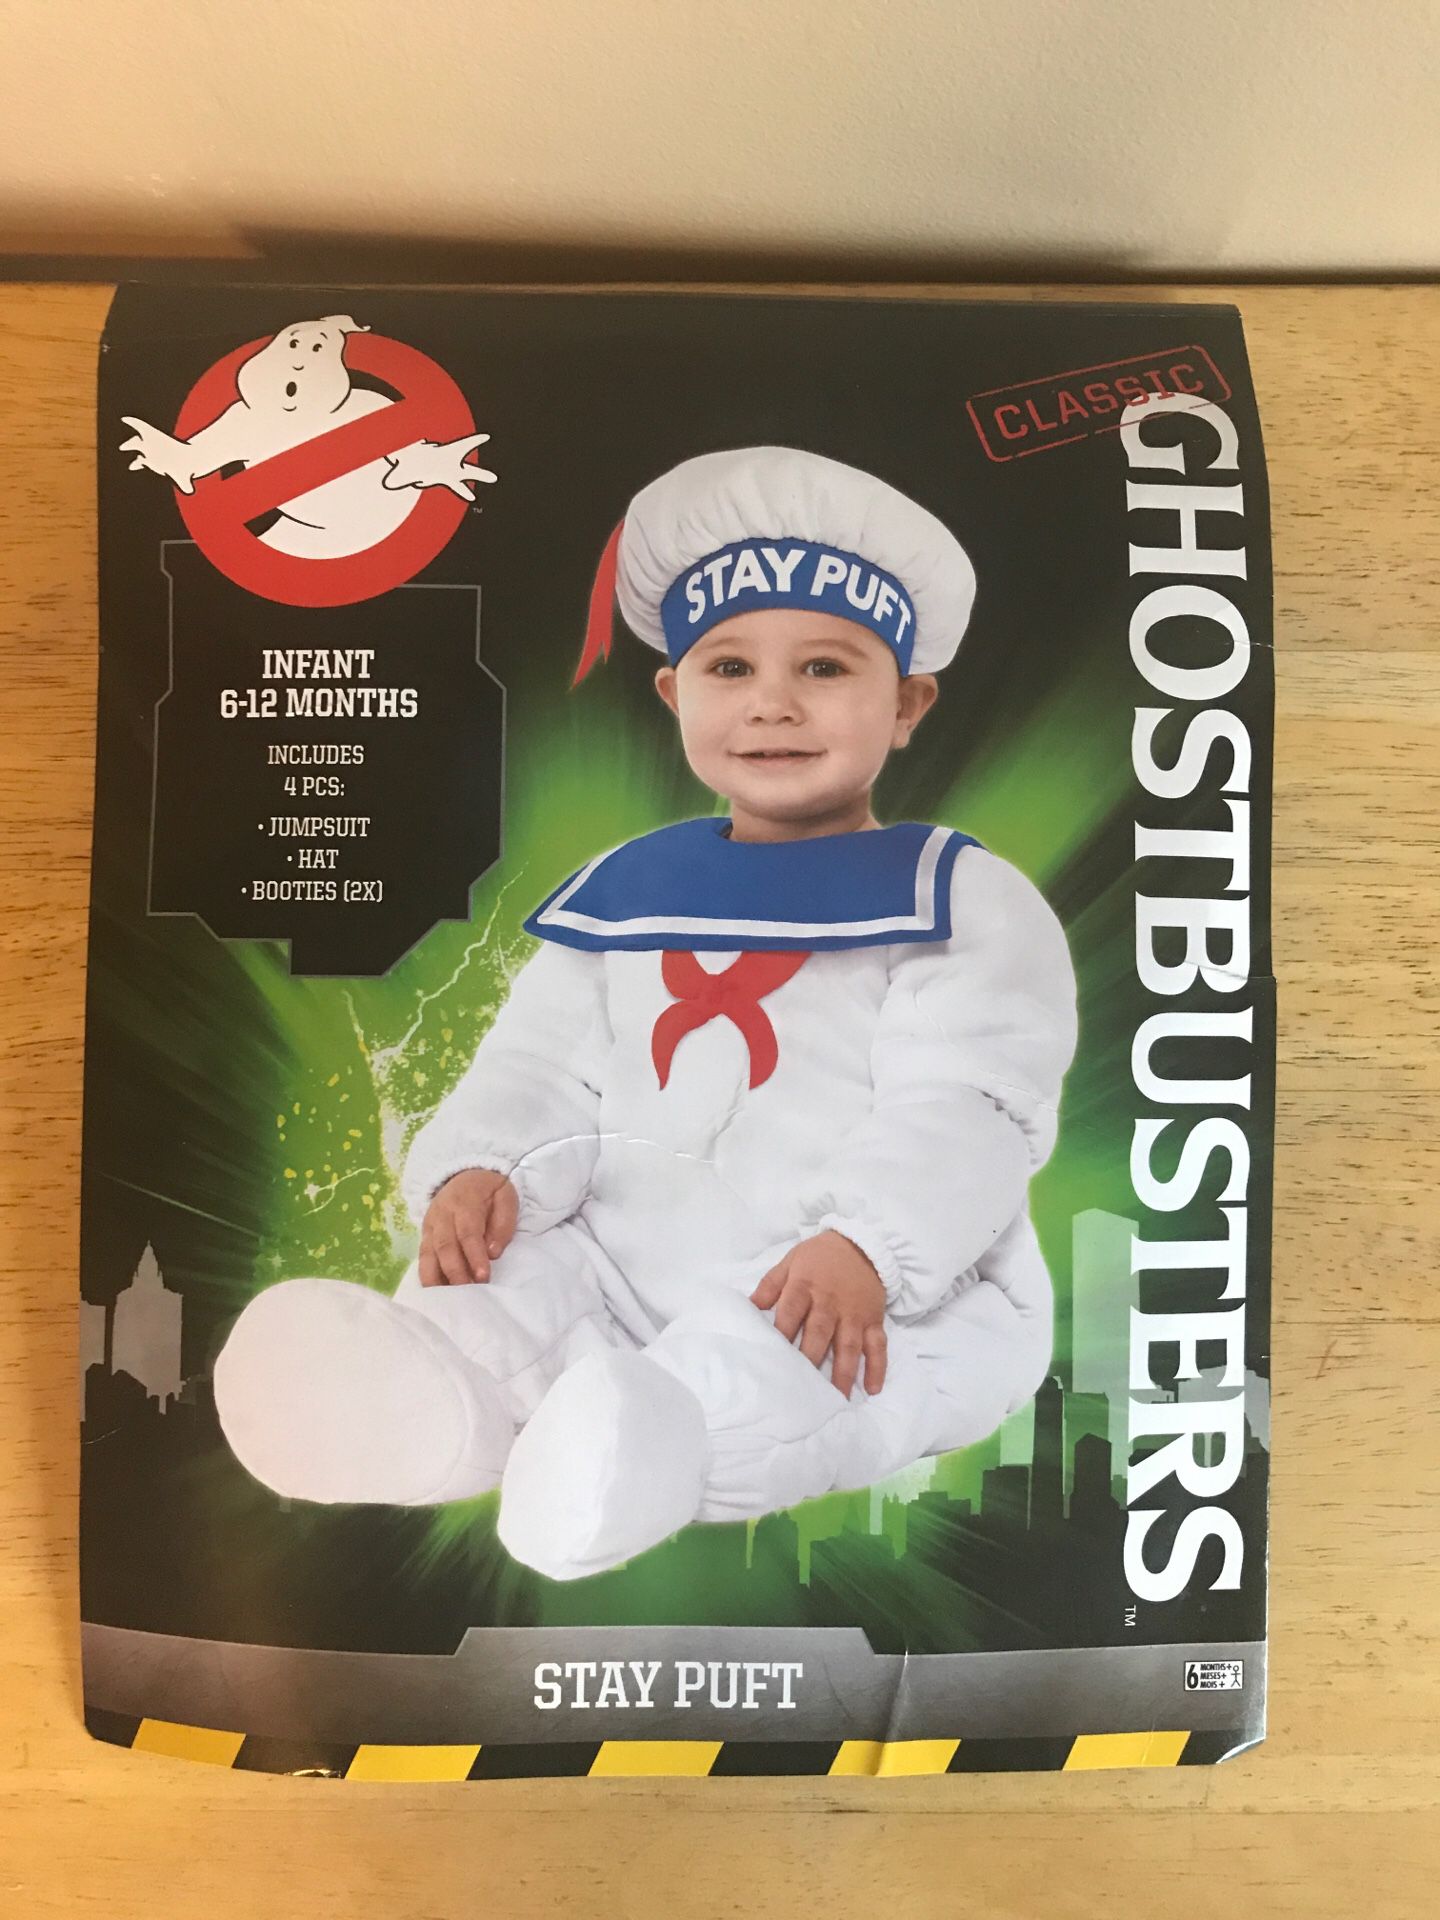 GHOSTBUSTERS STAY PUFT COSTUME GREAT FOR BIRTHDAY OR DRESS UP BABY 6-12 MONTHS